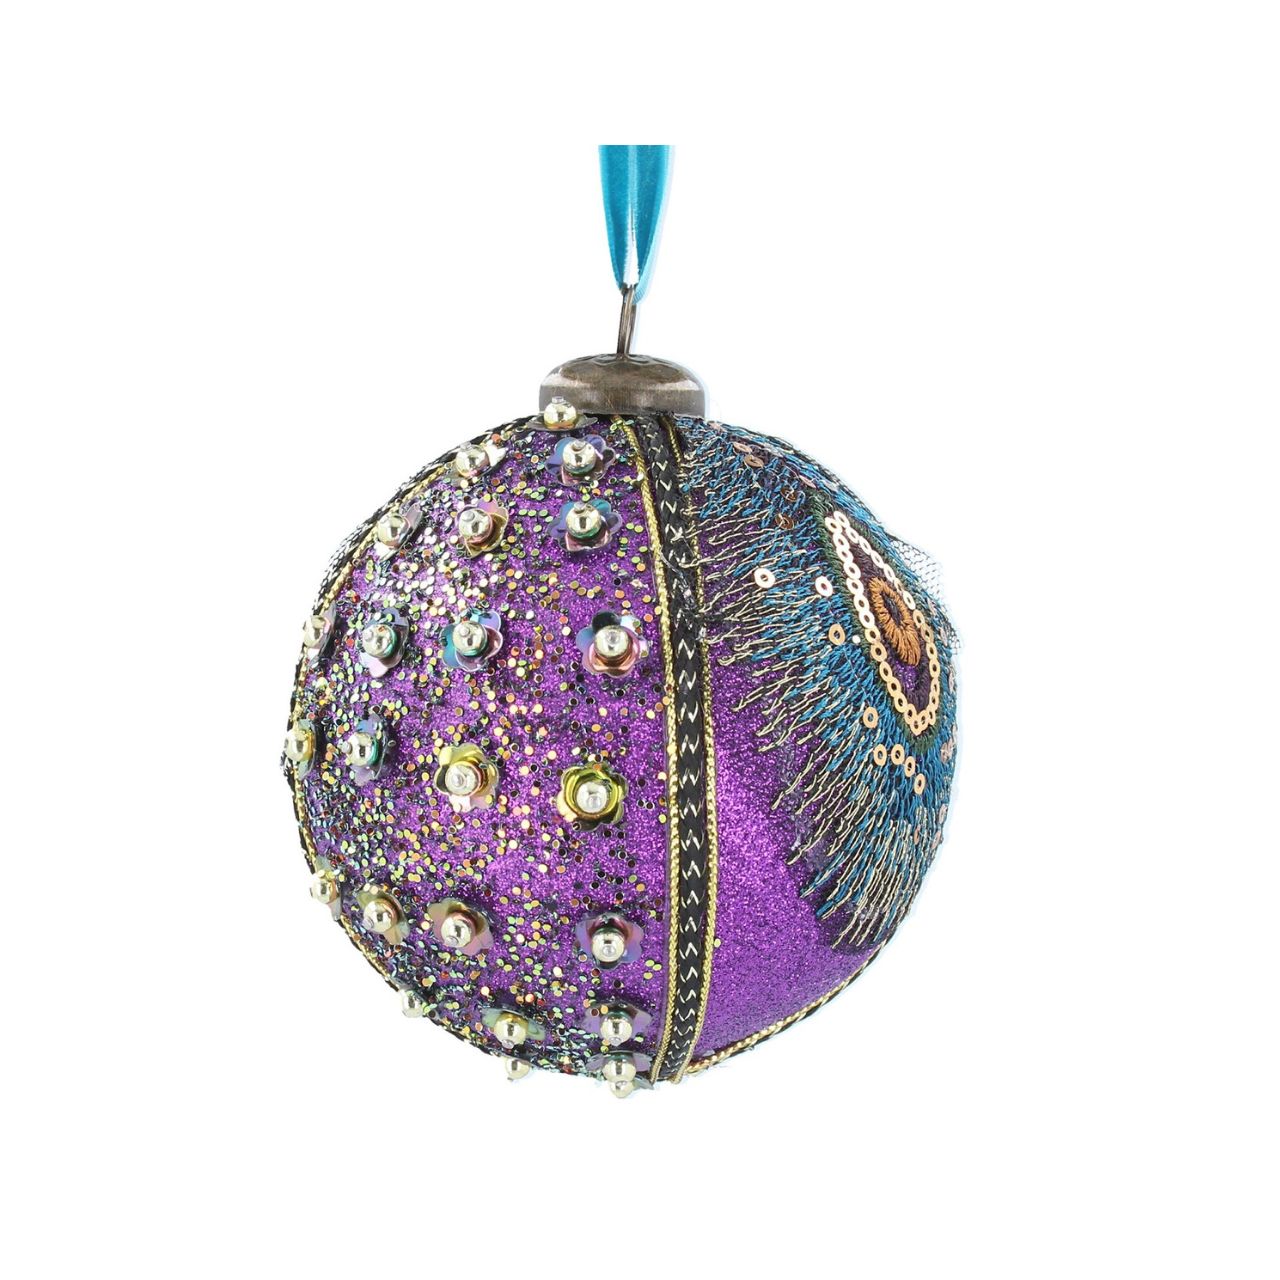 Gisela Graham Peacock Sequin Christmas Bauble Hanging Decoration  Browse our beautiful range of luxury Christmas tree decorations and ornaments for your tree this Christmas.